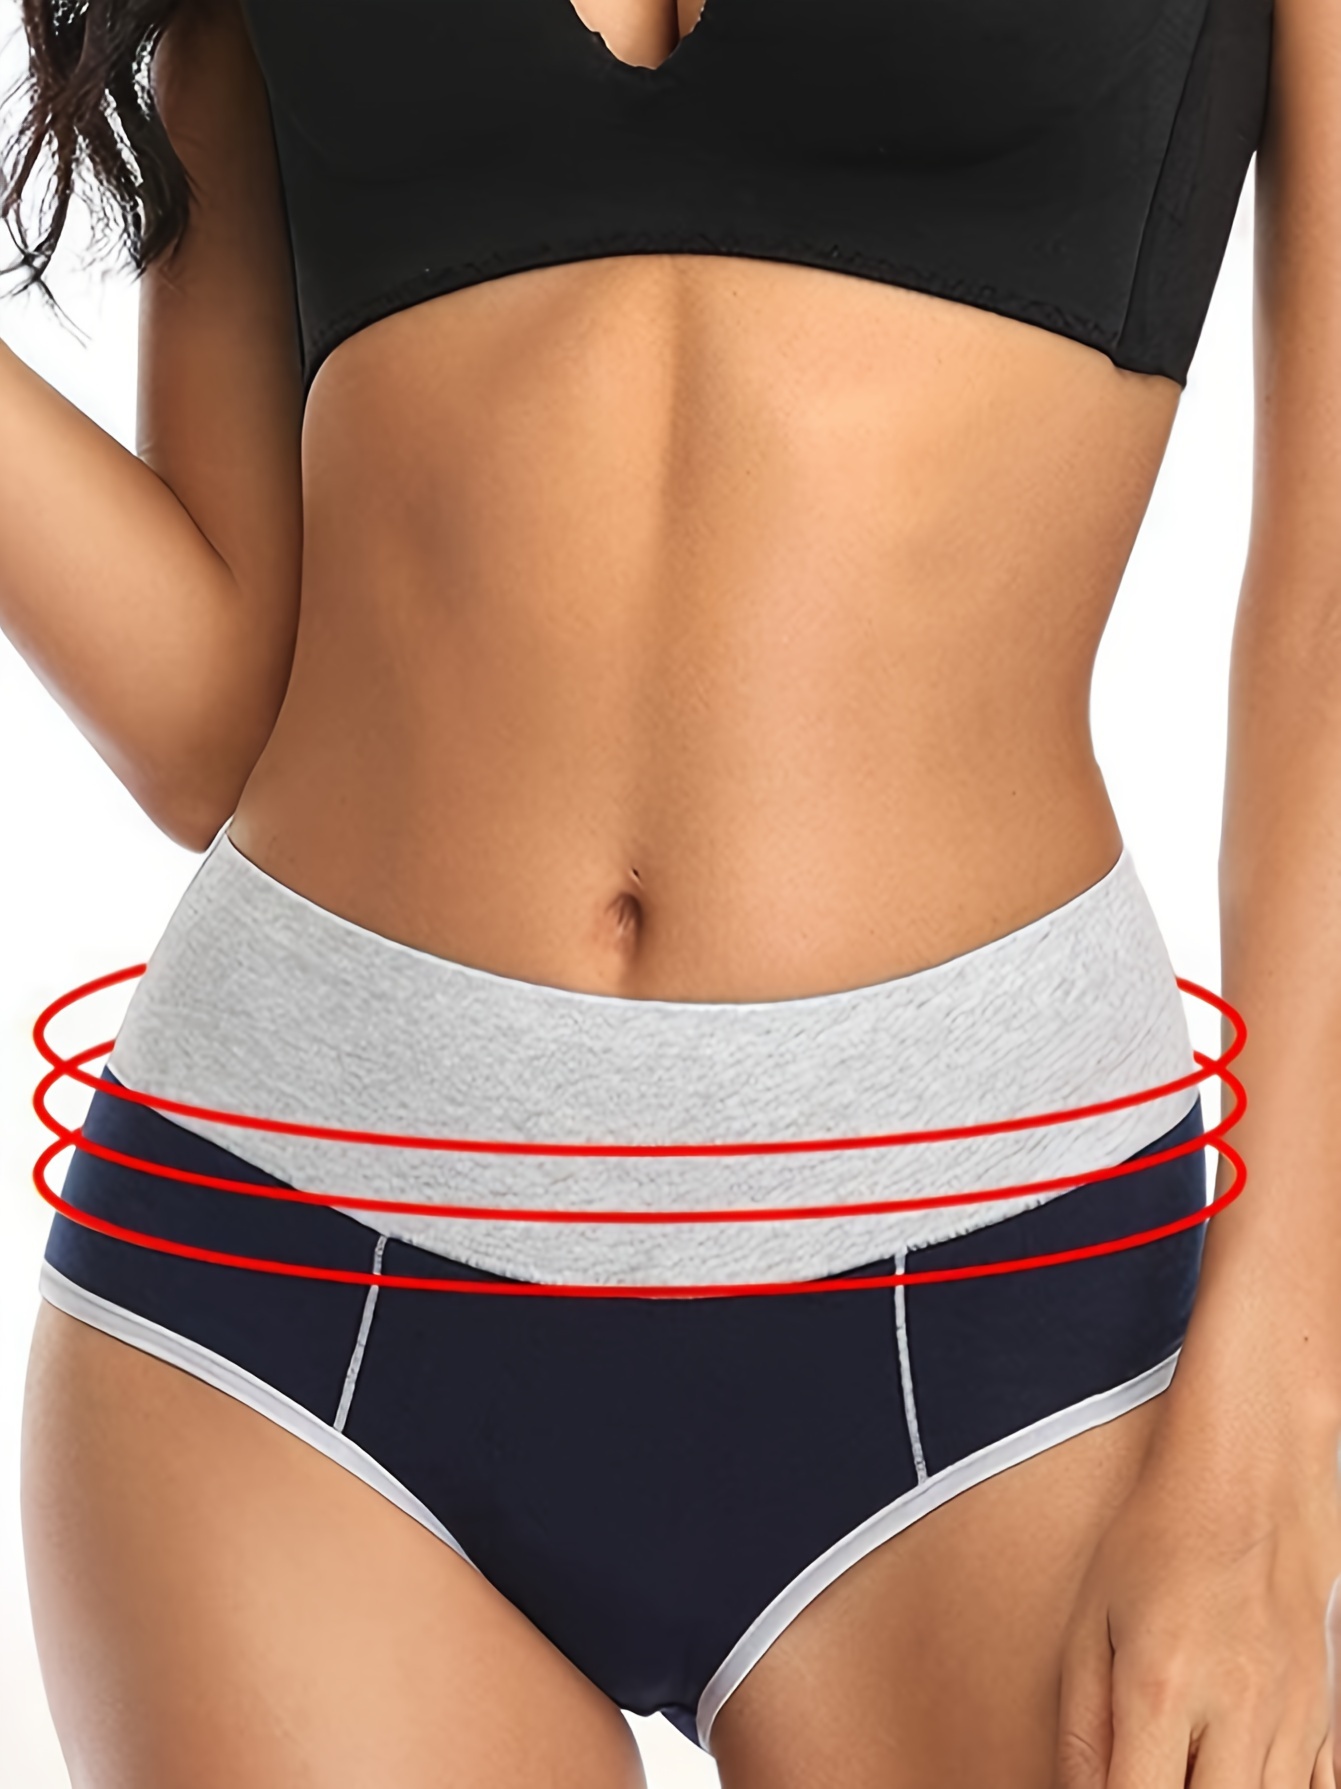  5 Pack Womens Briefs Cotton Underwear,Women's Lace Underwear  High Waist Cotton Underwear Stretch Briefs Soft Underpants Breathable Ladies  Panties 5 Pack : Clothing, Shoes & Jewelry